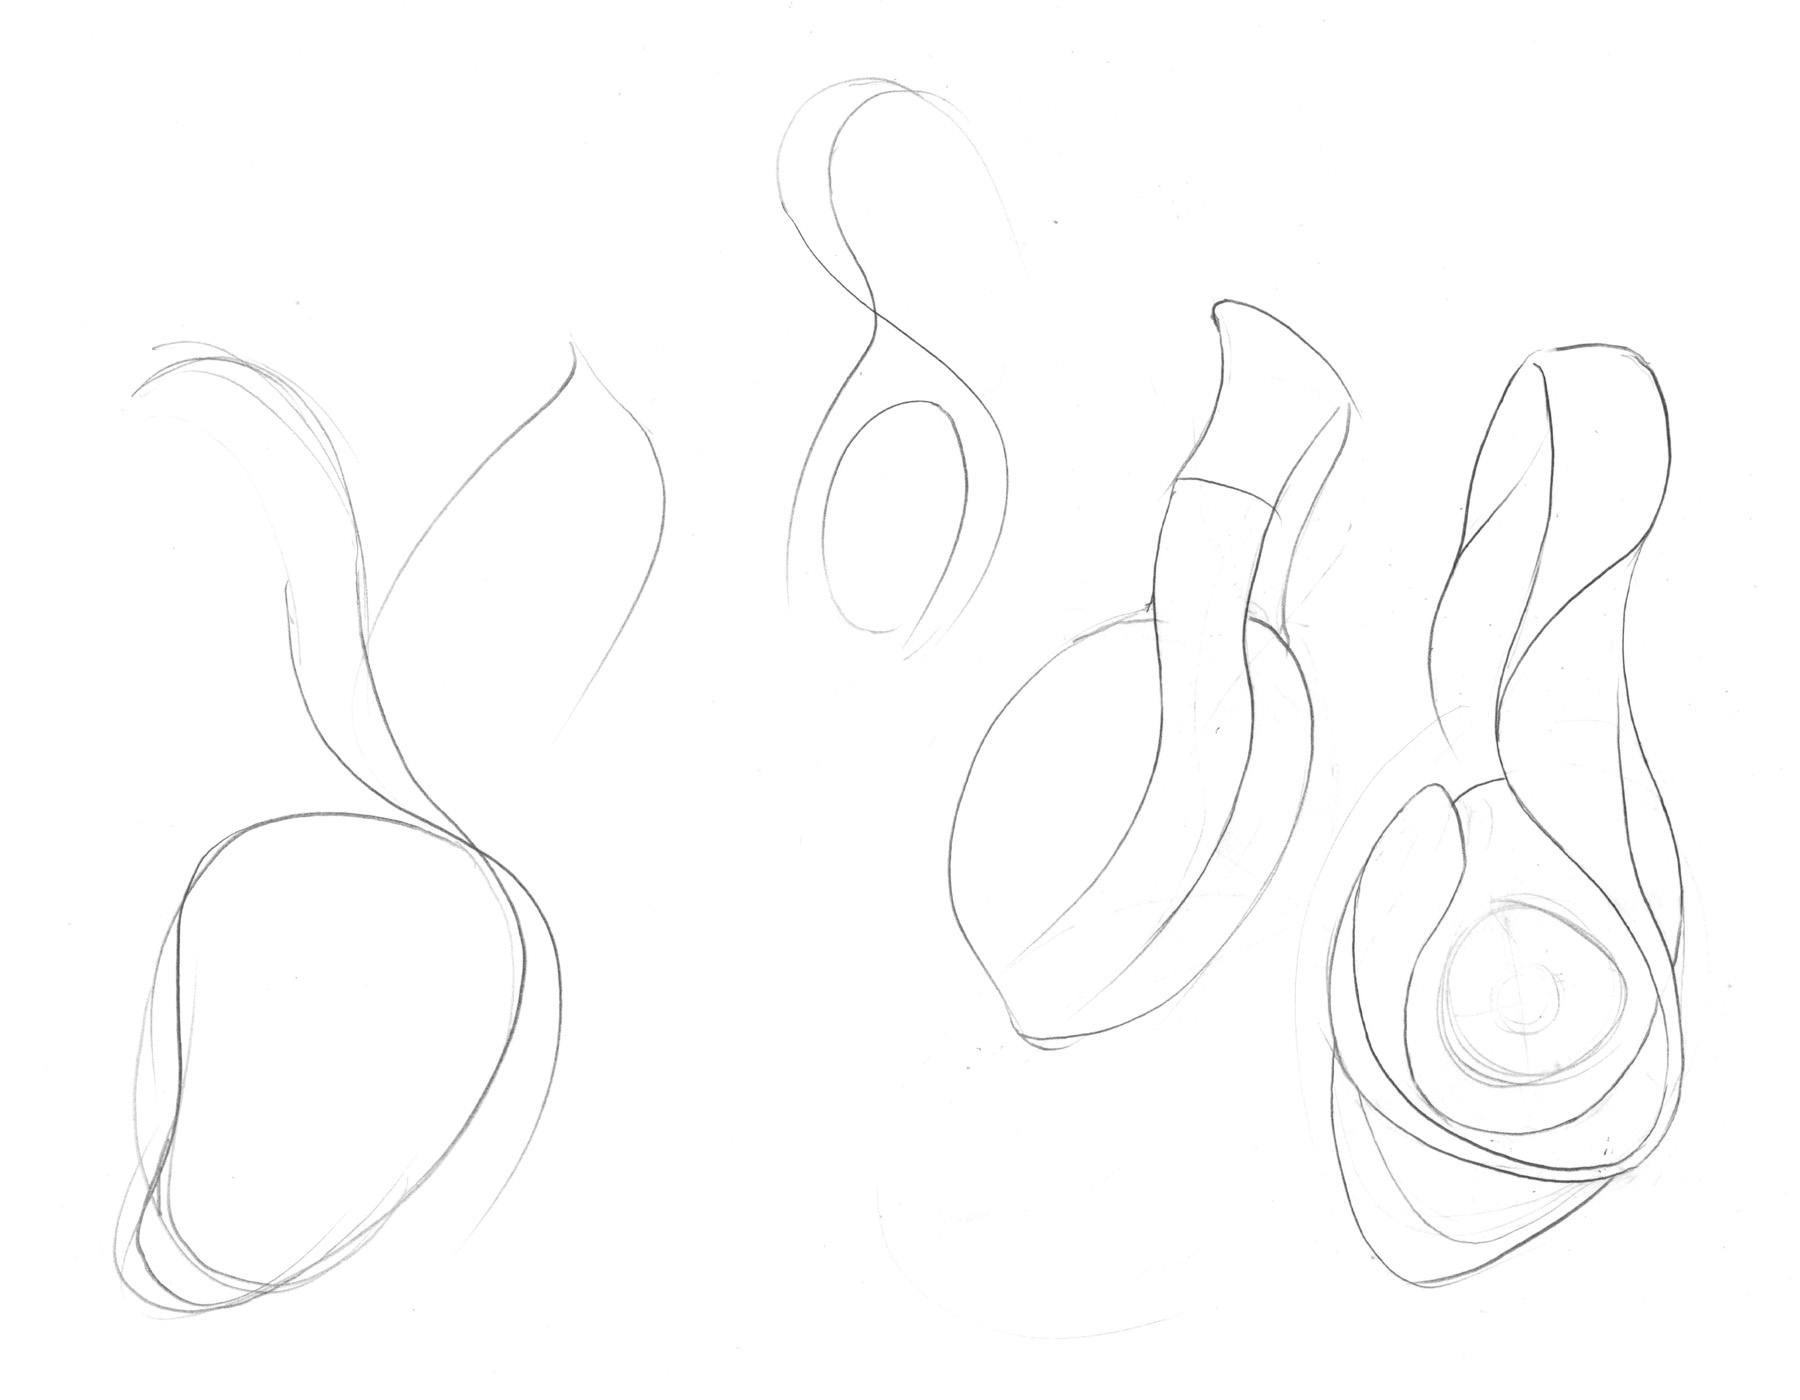 Rough sketches of headphones defined by large, sweeping curves.